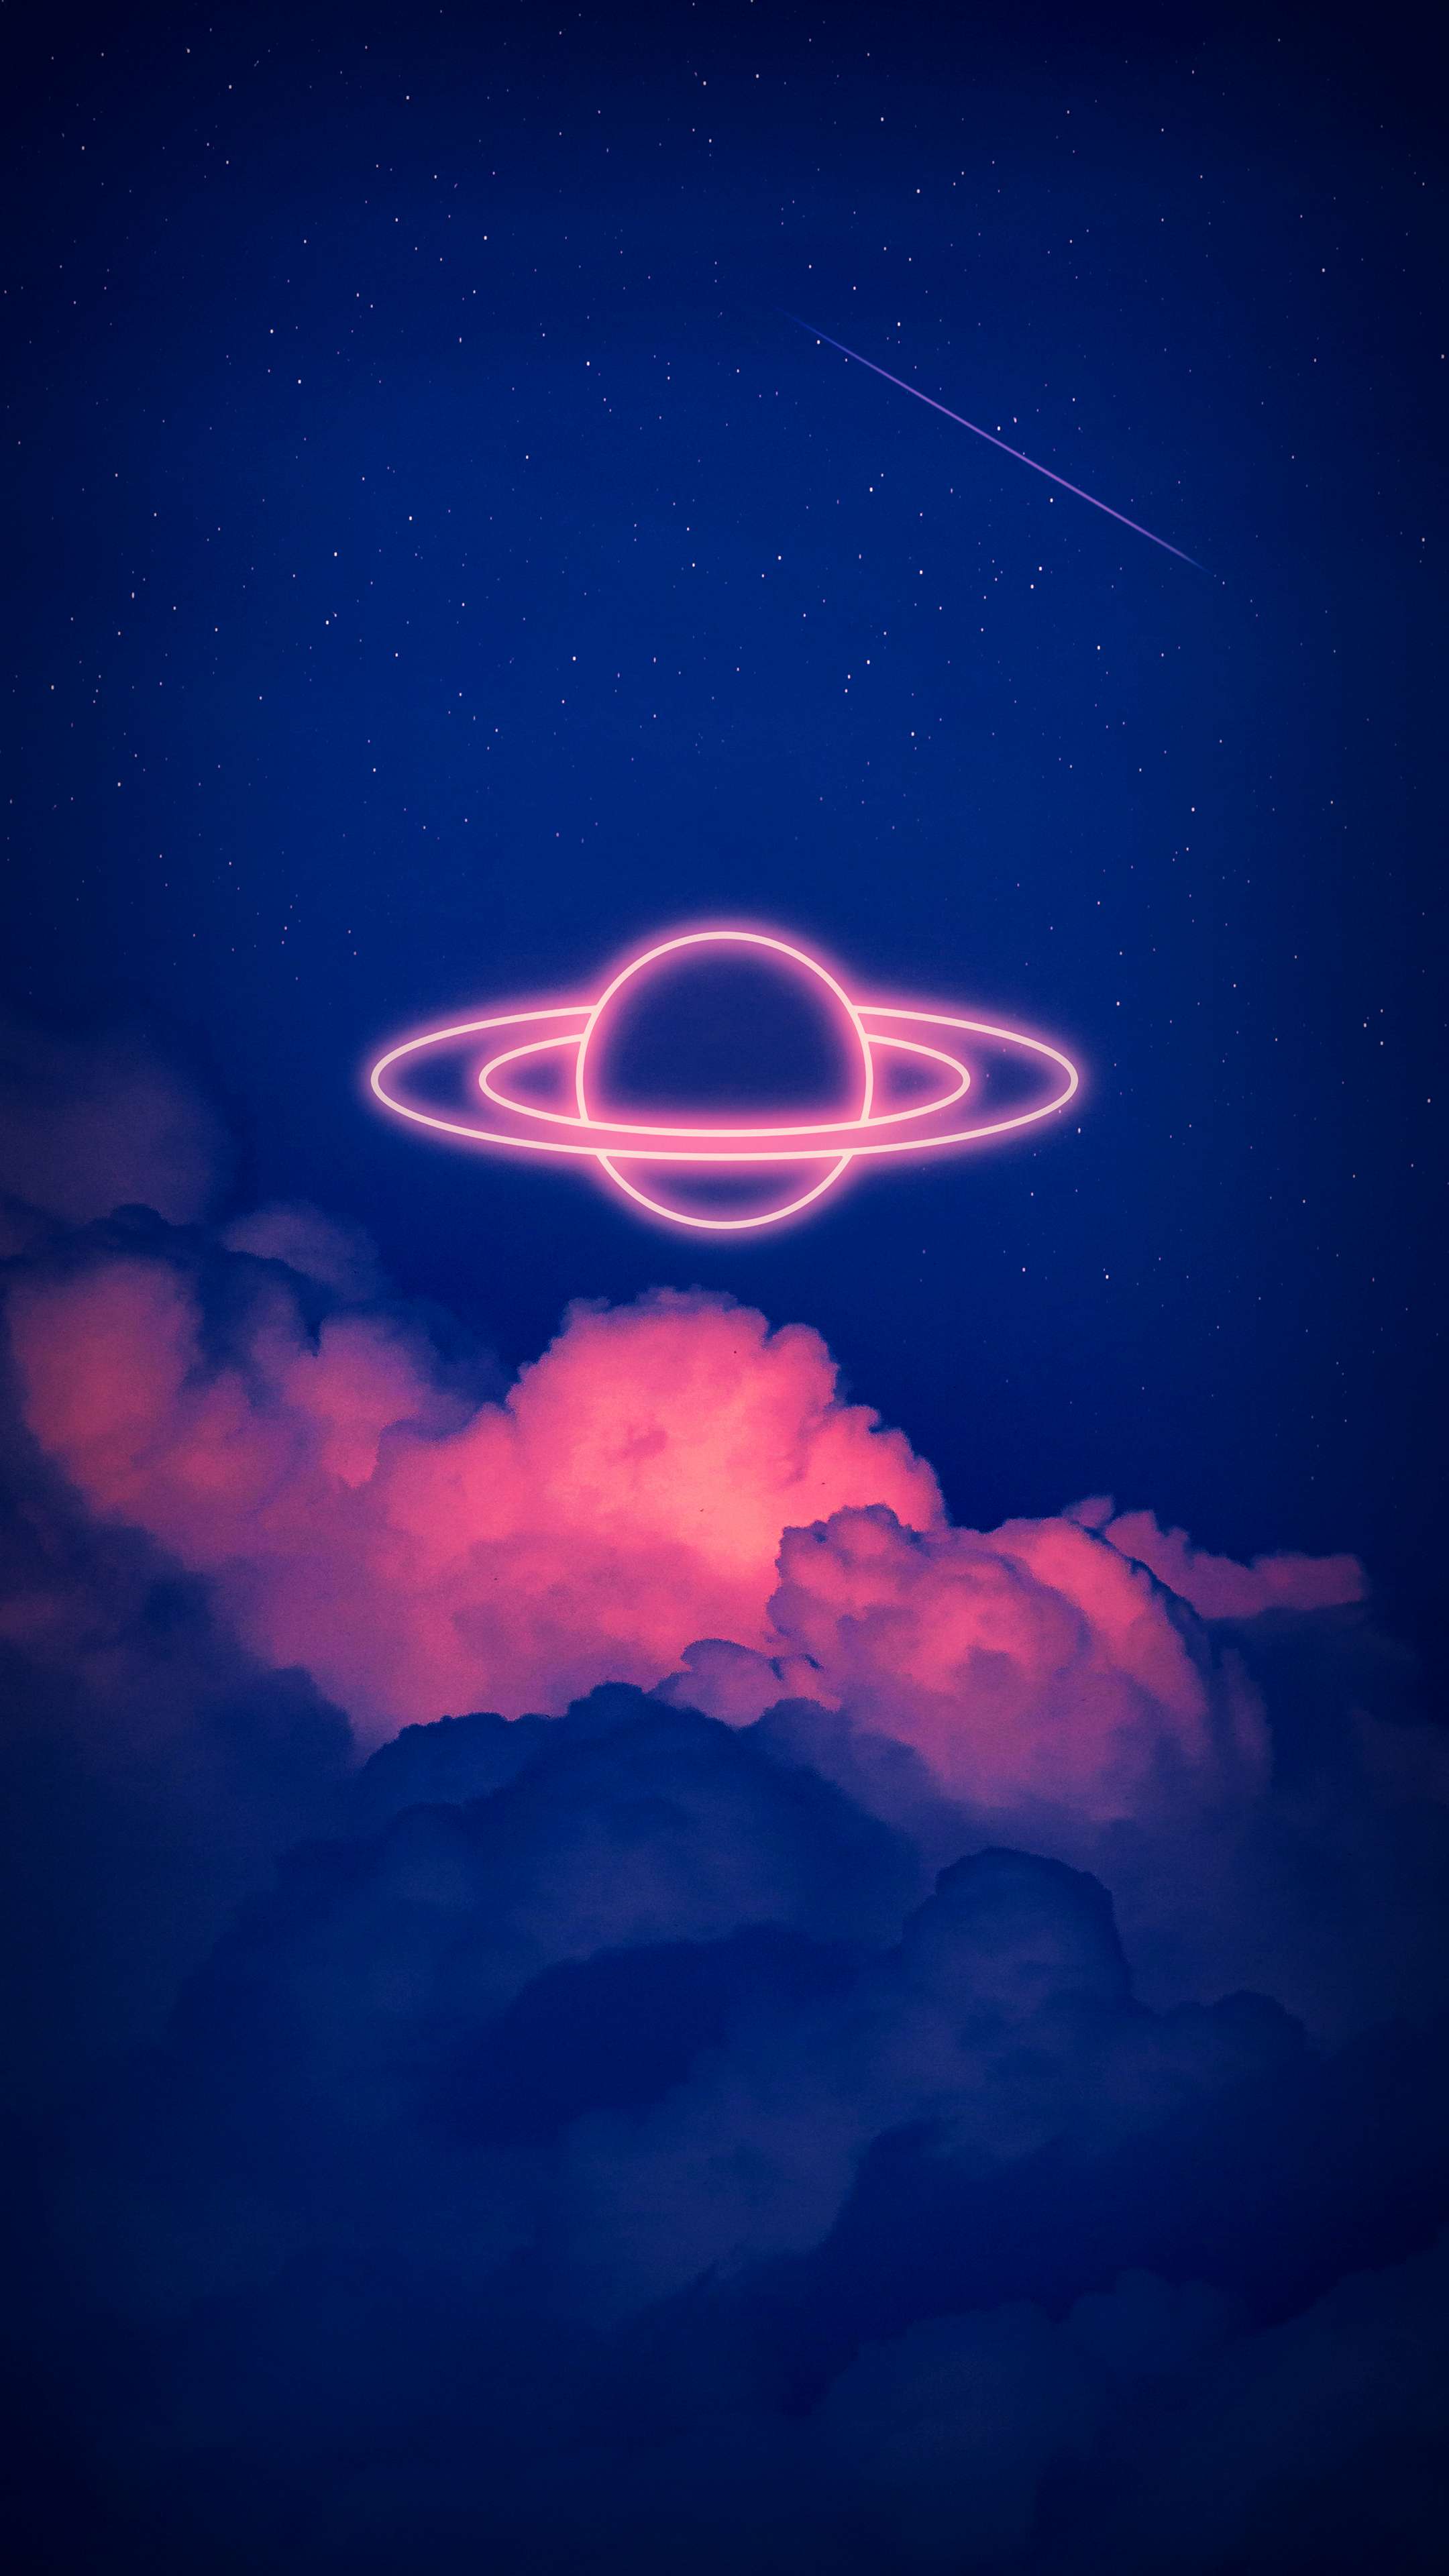 Creative Neon Space Mobile Wallpaper Images Free Download on Lovepik   400992669